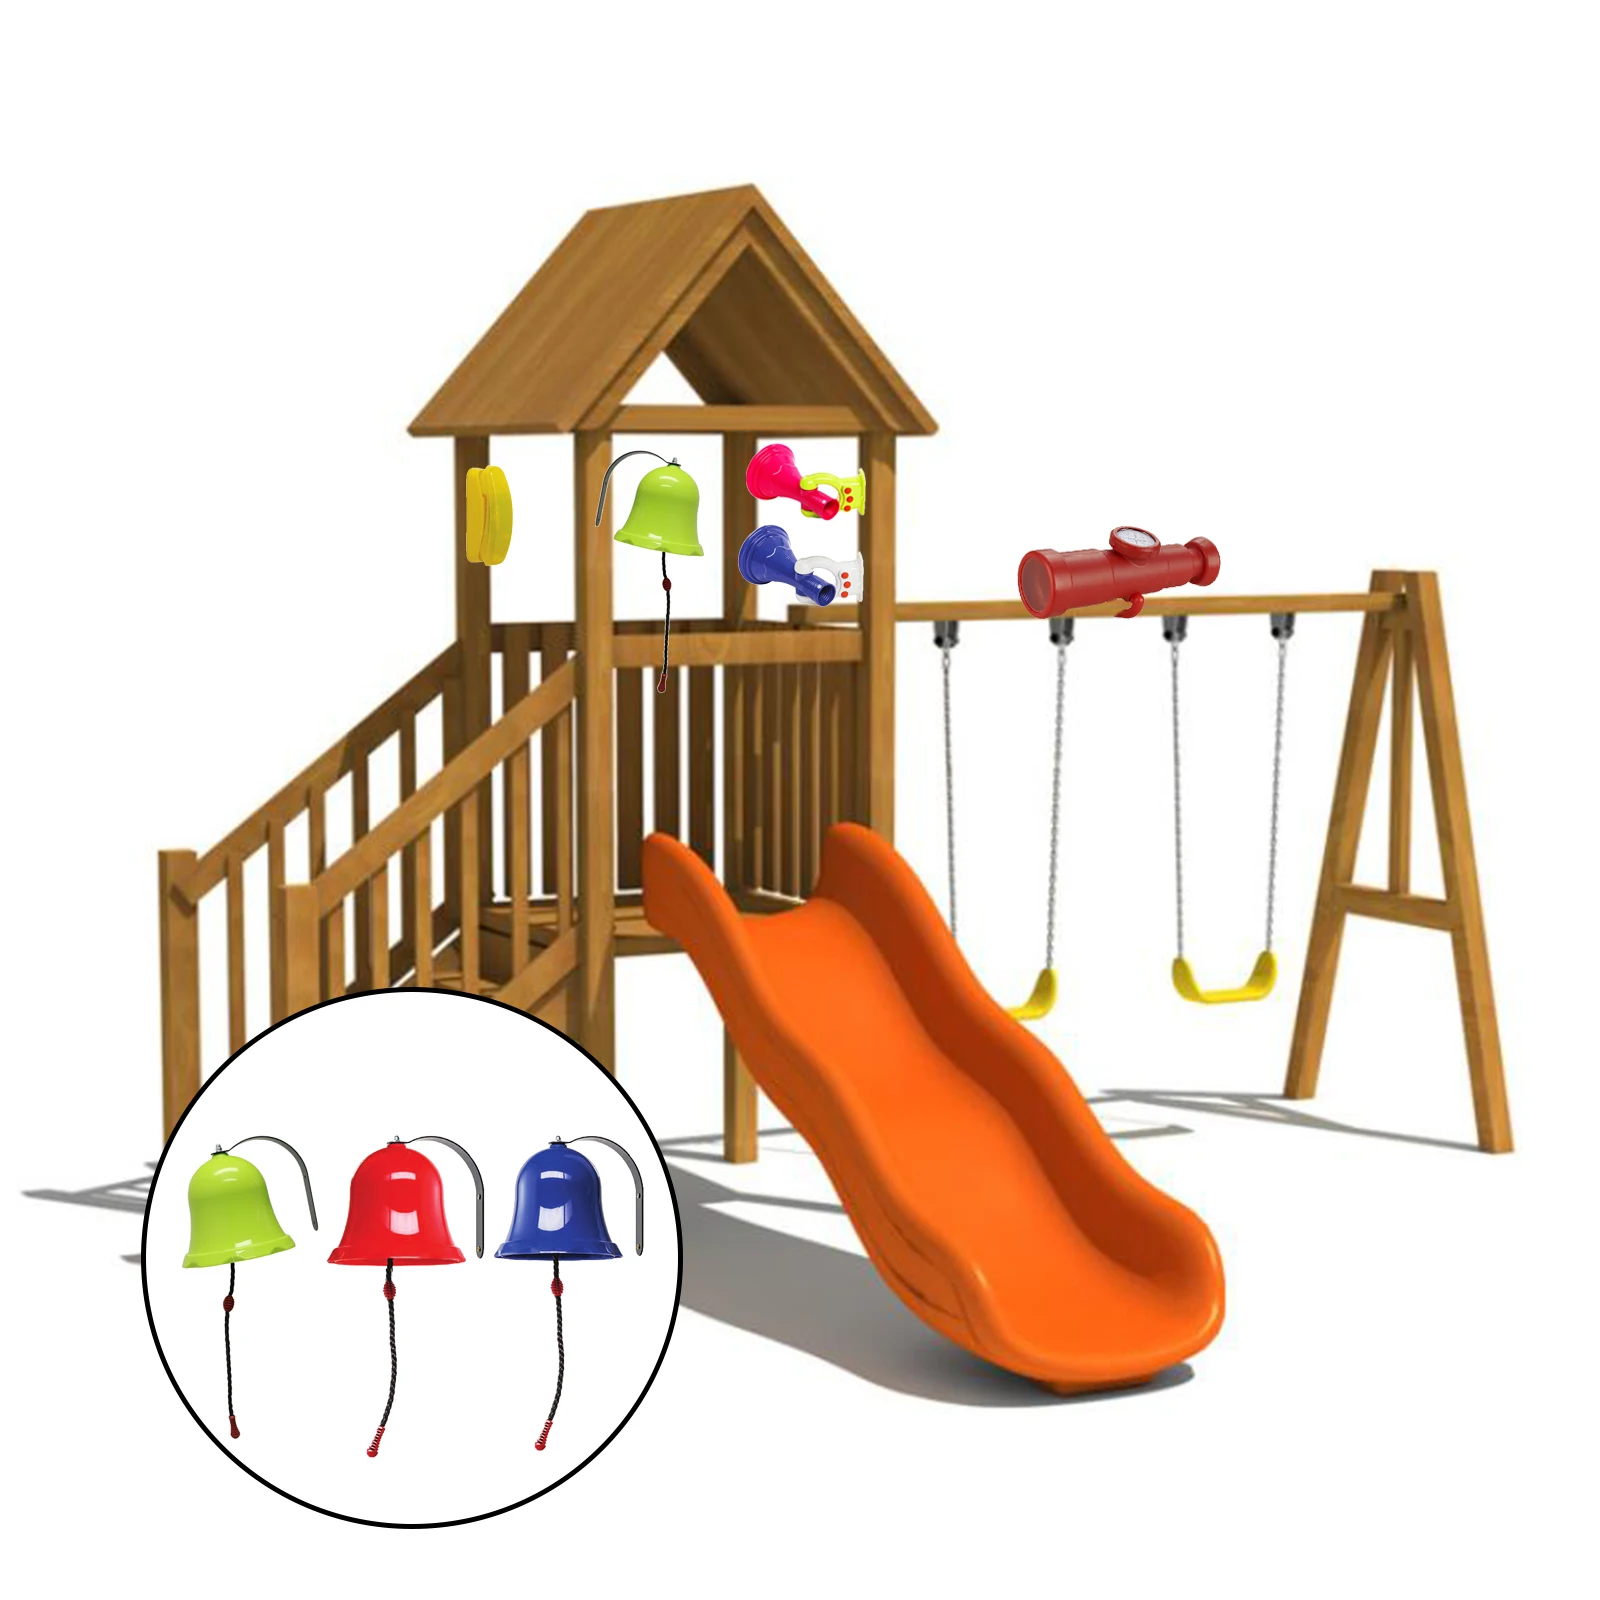 Toys Bell Playground Pretend Play Hanging Bell Swing Set Accessory Plastic for Outdoor Wooden Swing Set for Boys Girls Gift